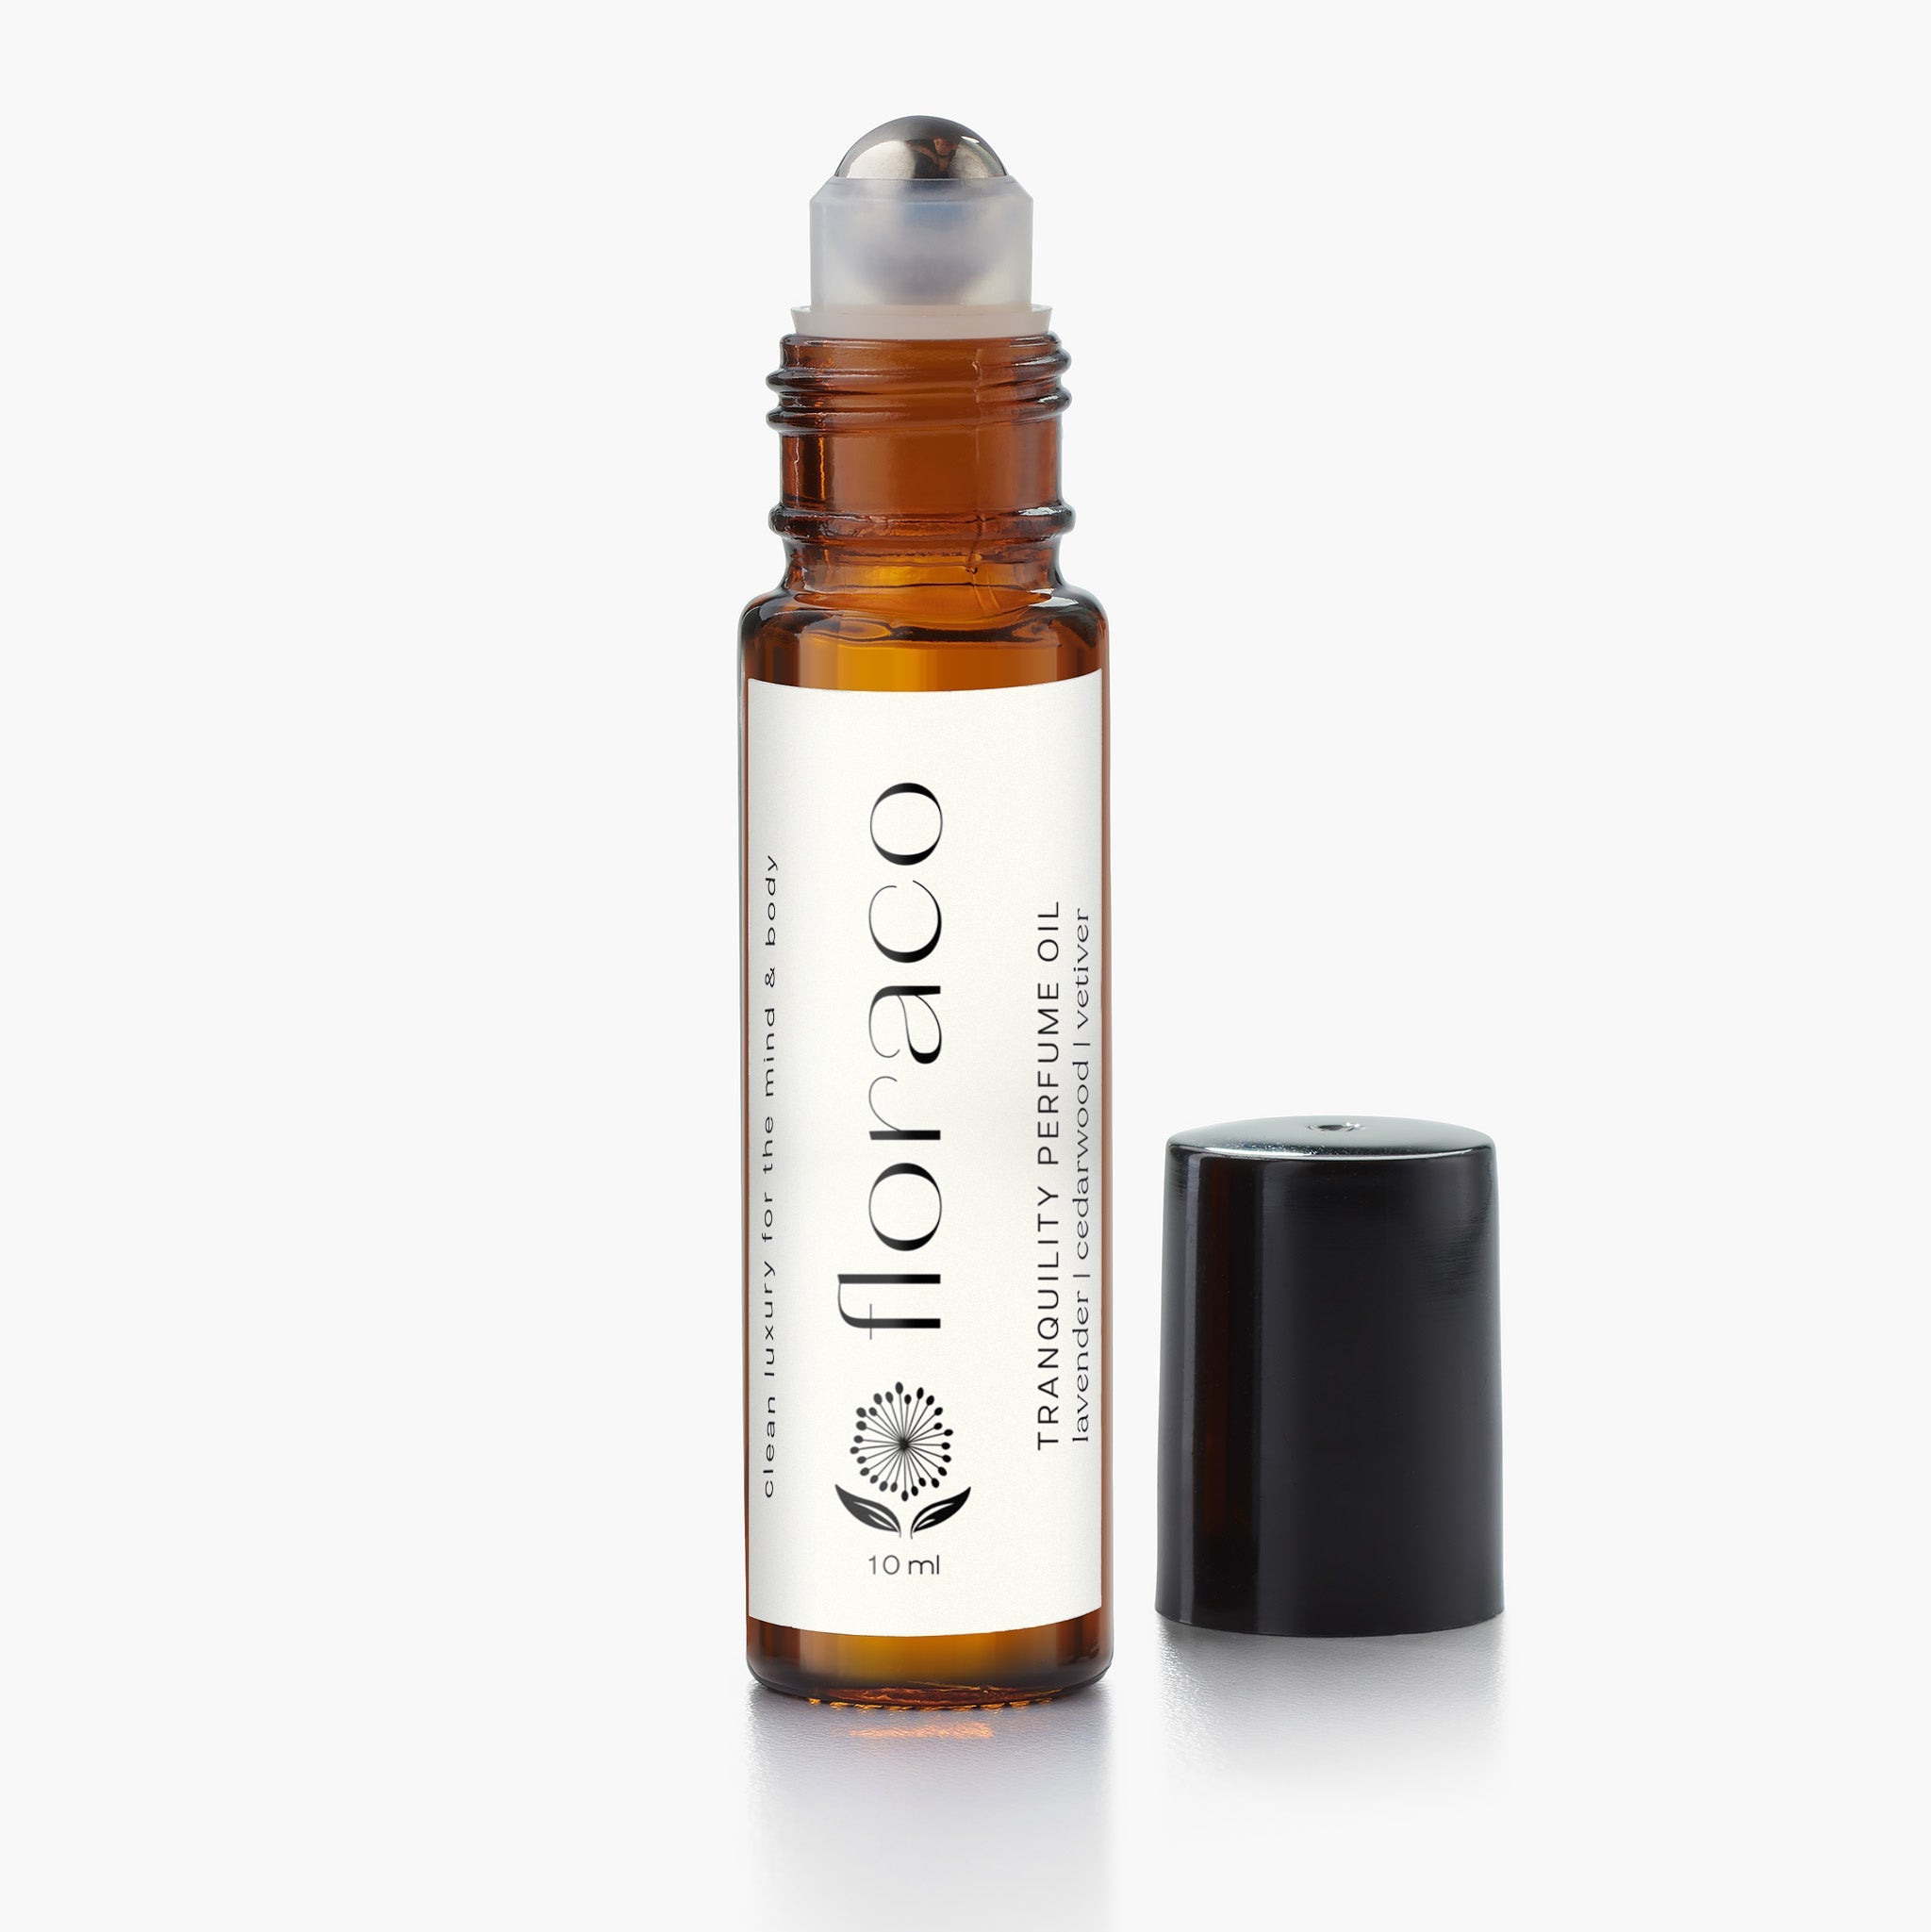 Tranquility Perfume Oil: Calm & Grounding